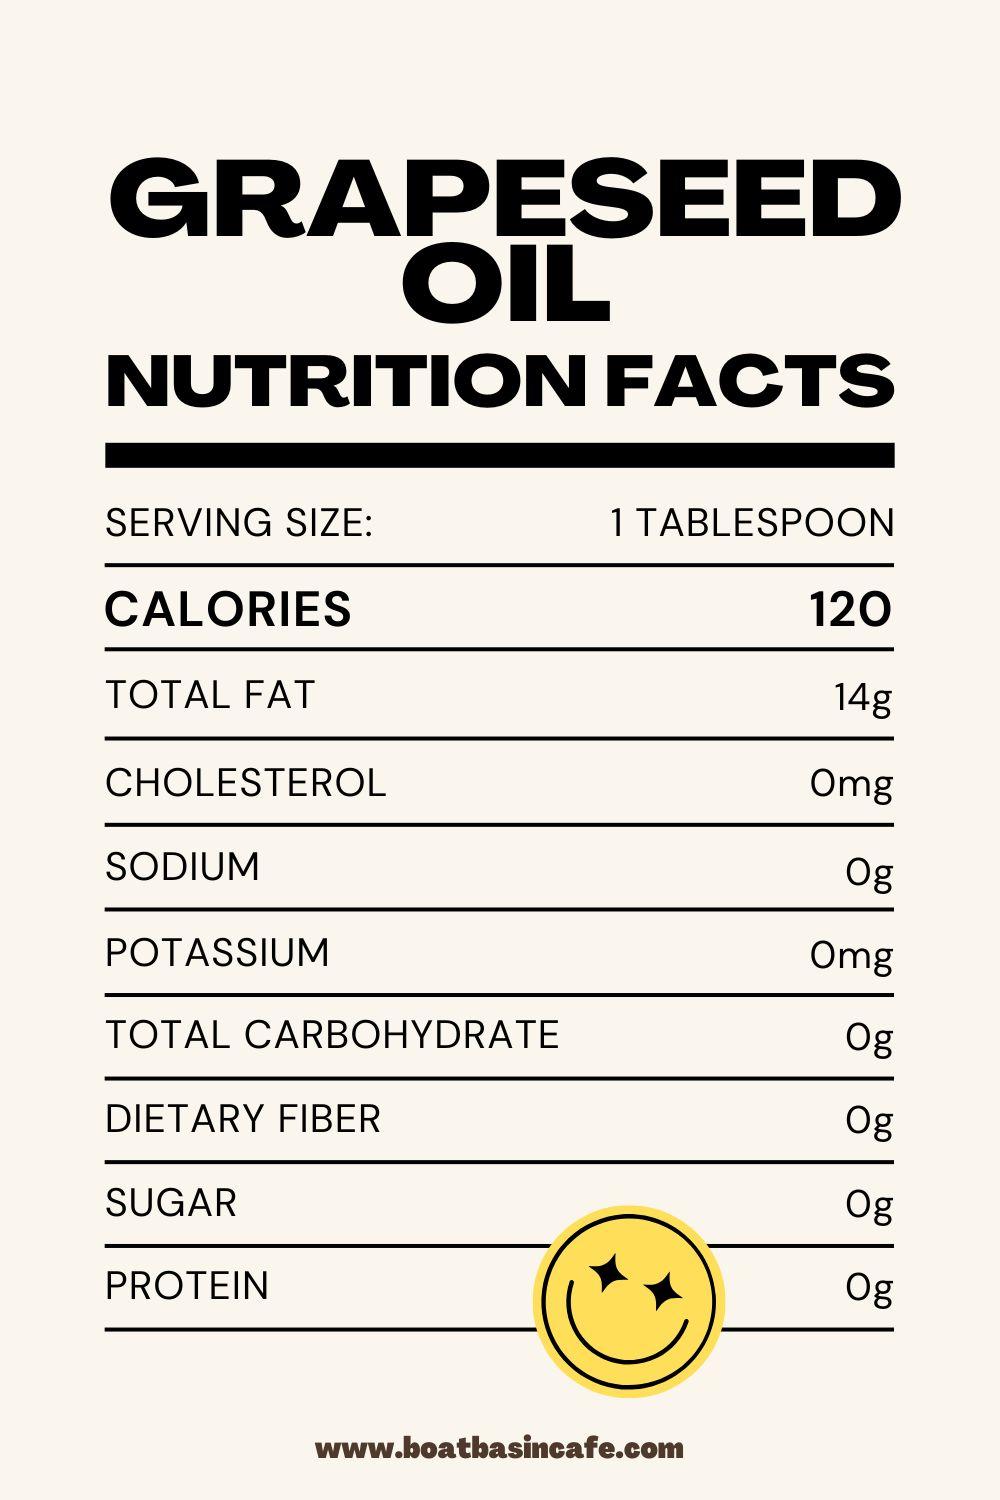 Nutritional Info About Grapeseed Oil